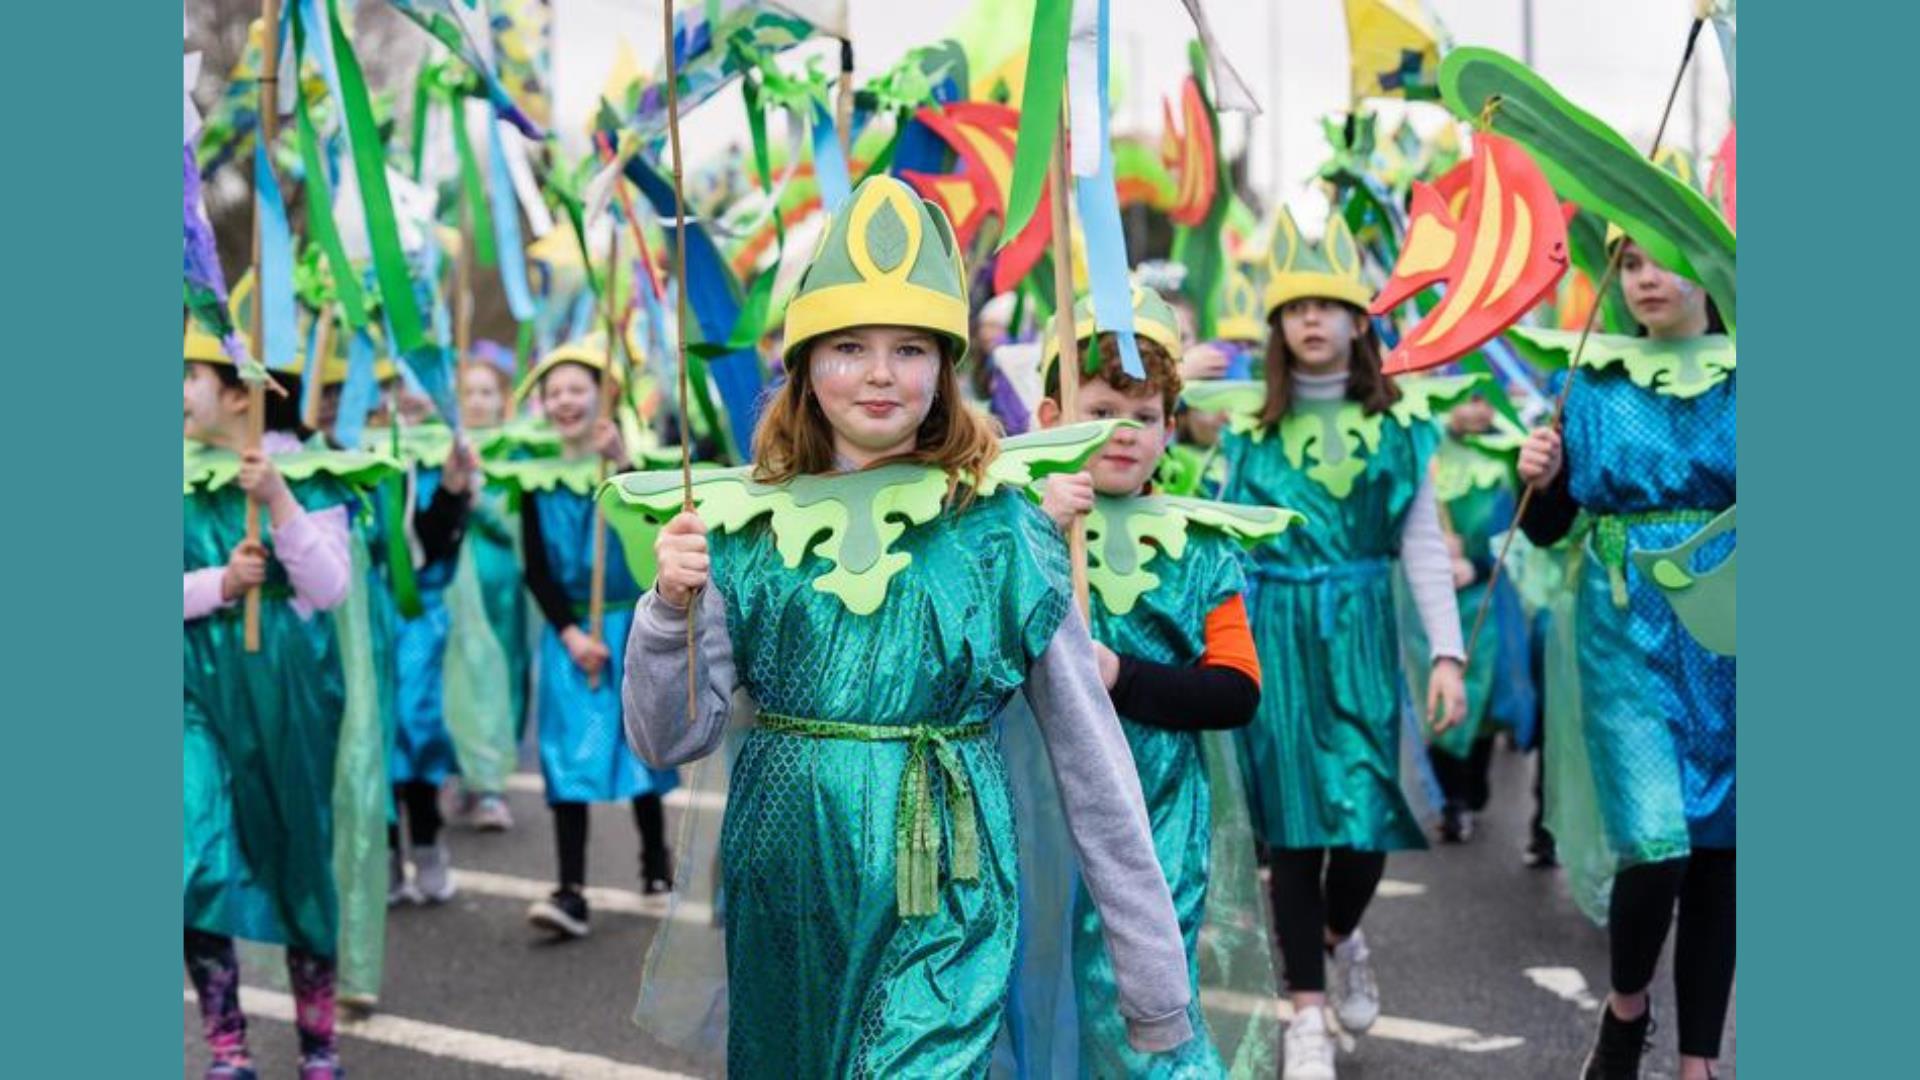 Previous scenes from the St Patrick's Day Carnival Parade in Derry-Londonderry.